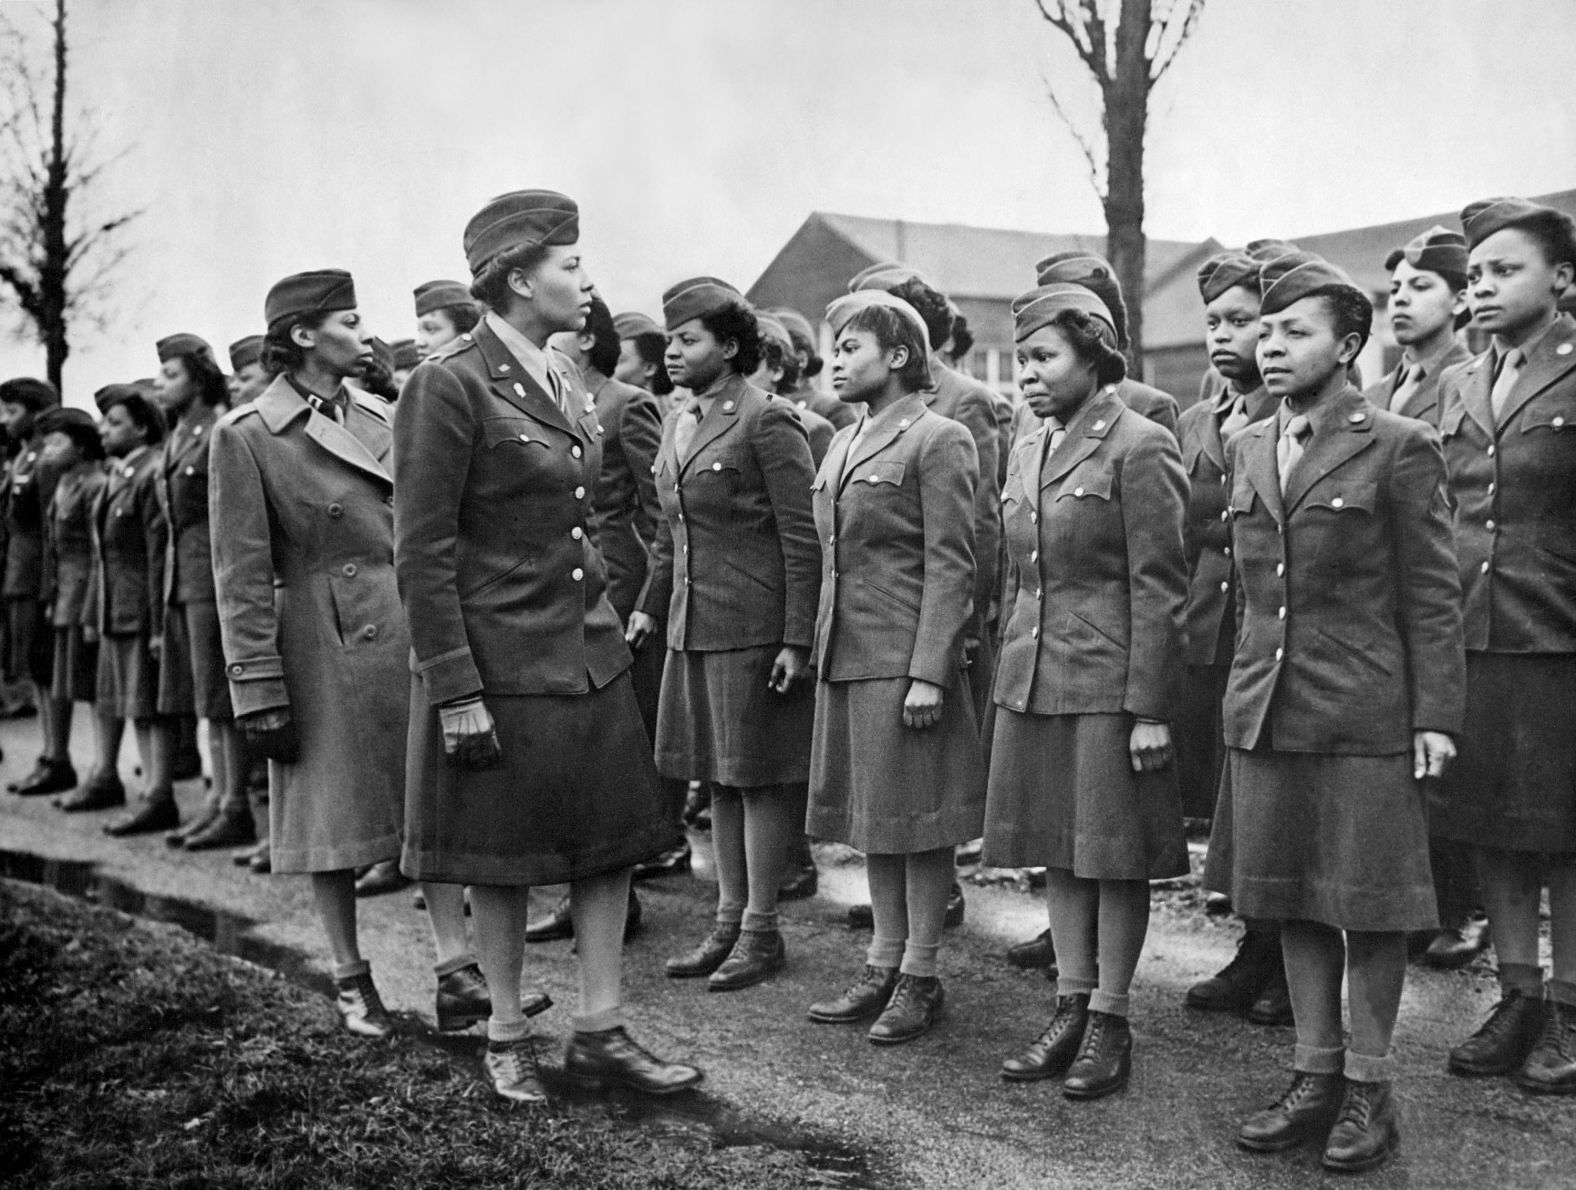 Army Maj. Charity Adams inspects members of the 6888th Central Postal Directory Battalion upon their arrival in England in February 1945. The "Six Triple Eight" was the only all-Black Women's Army Corps unit to serve in Europe during World War II.